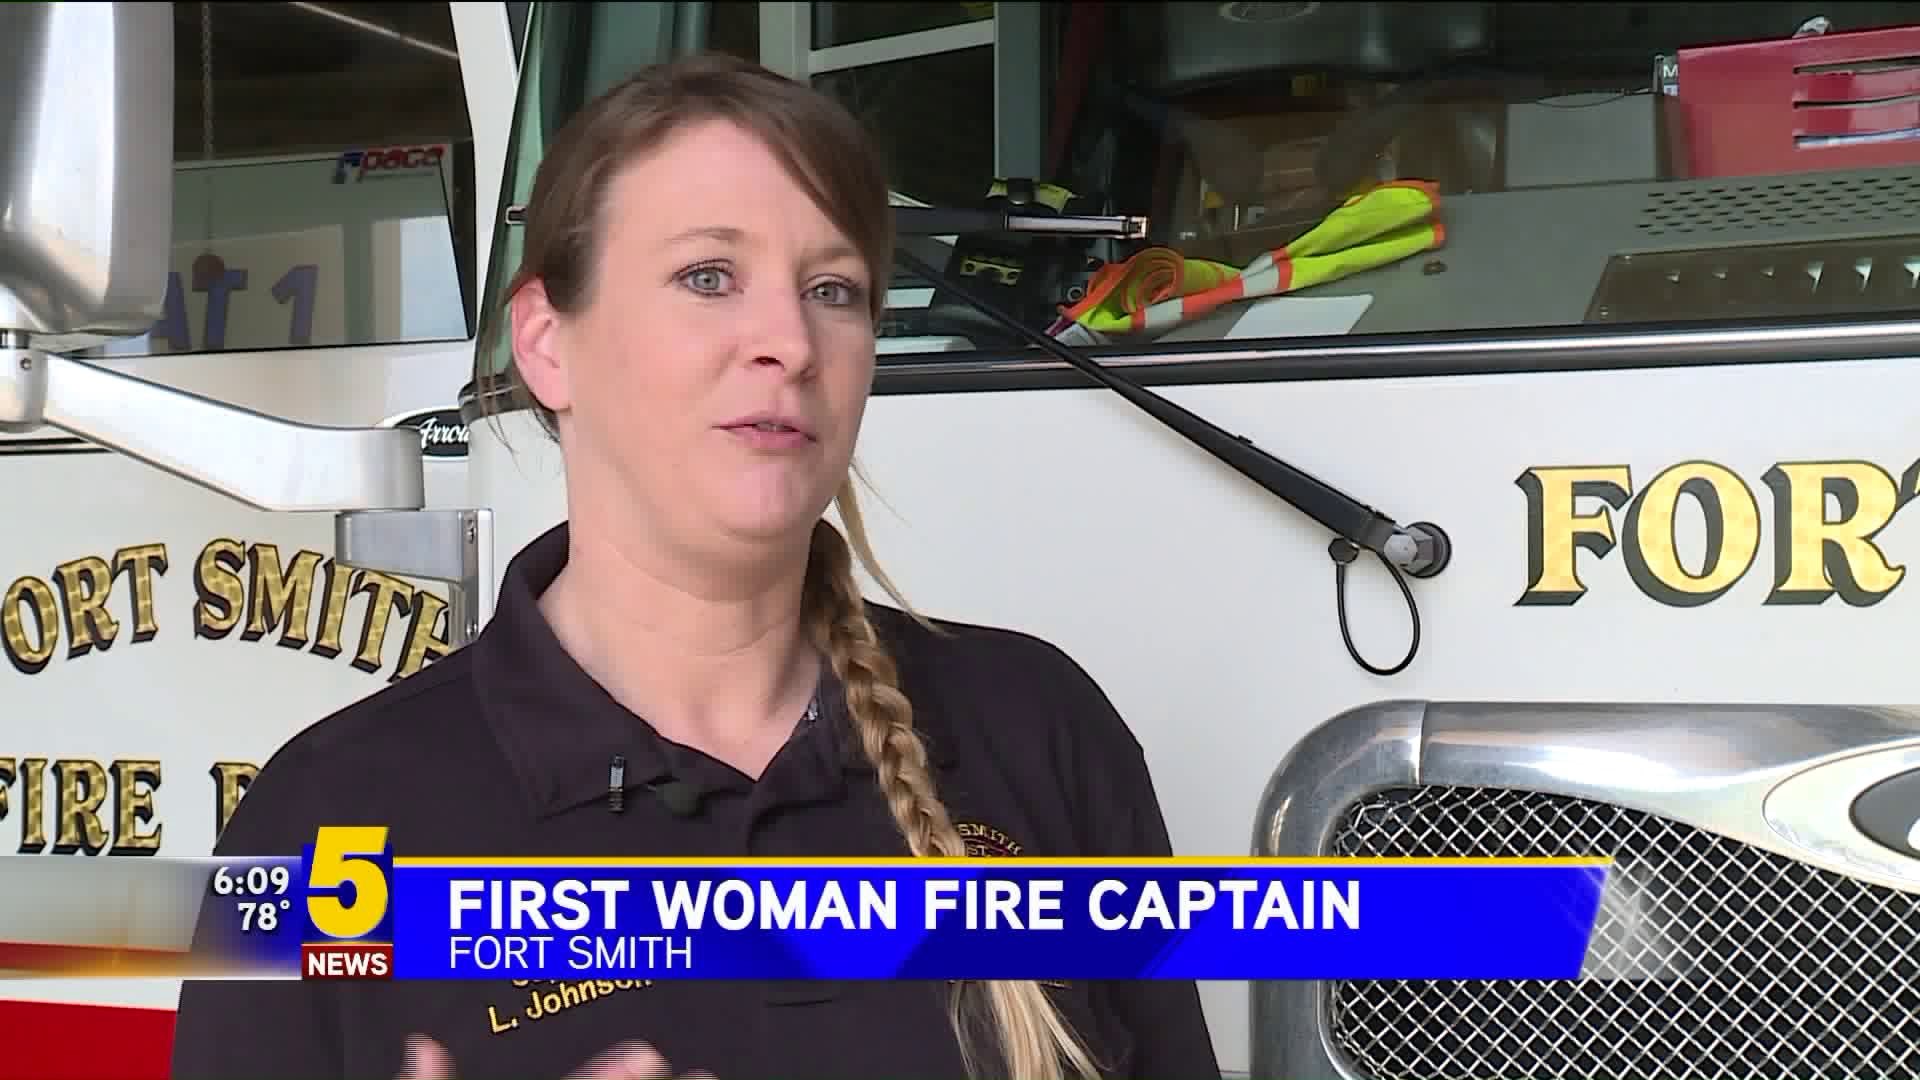 Fort Smith First Woman Fire Captain